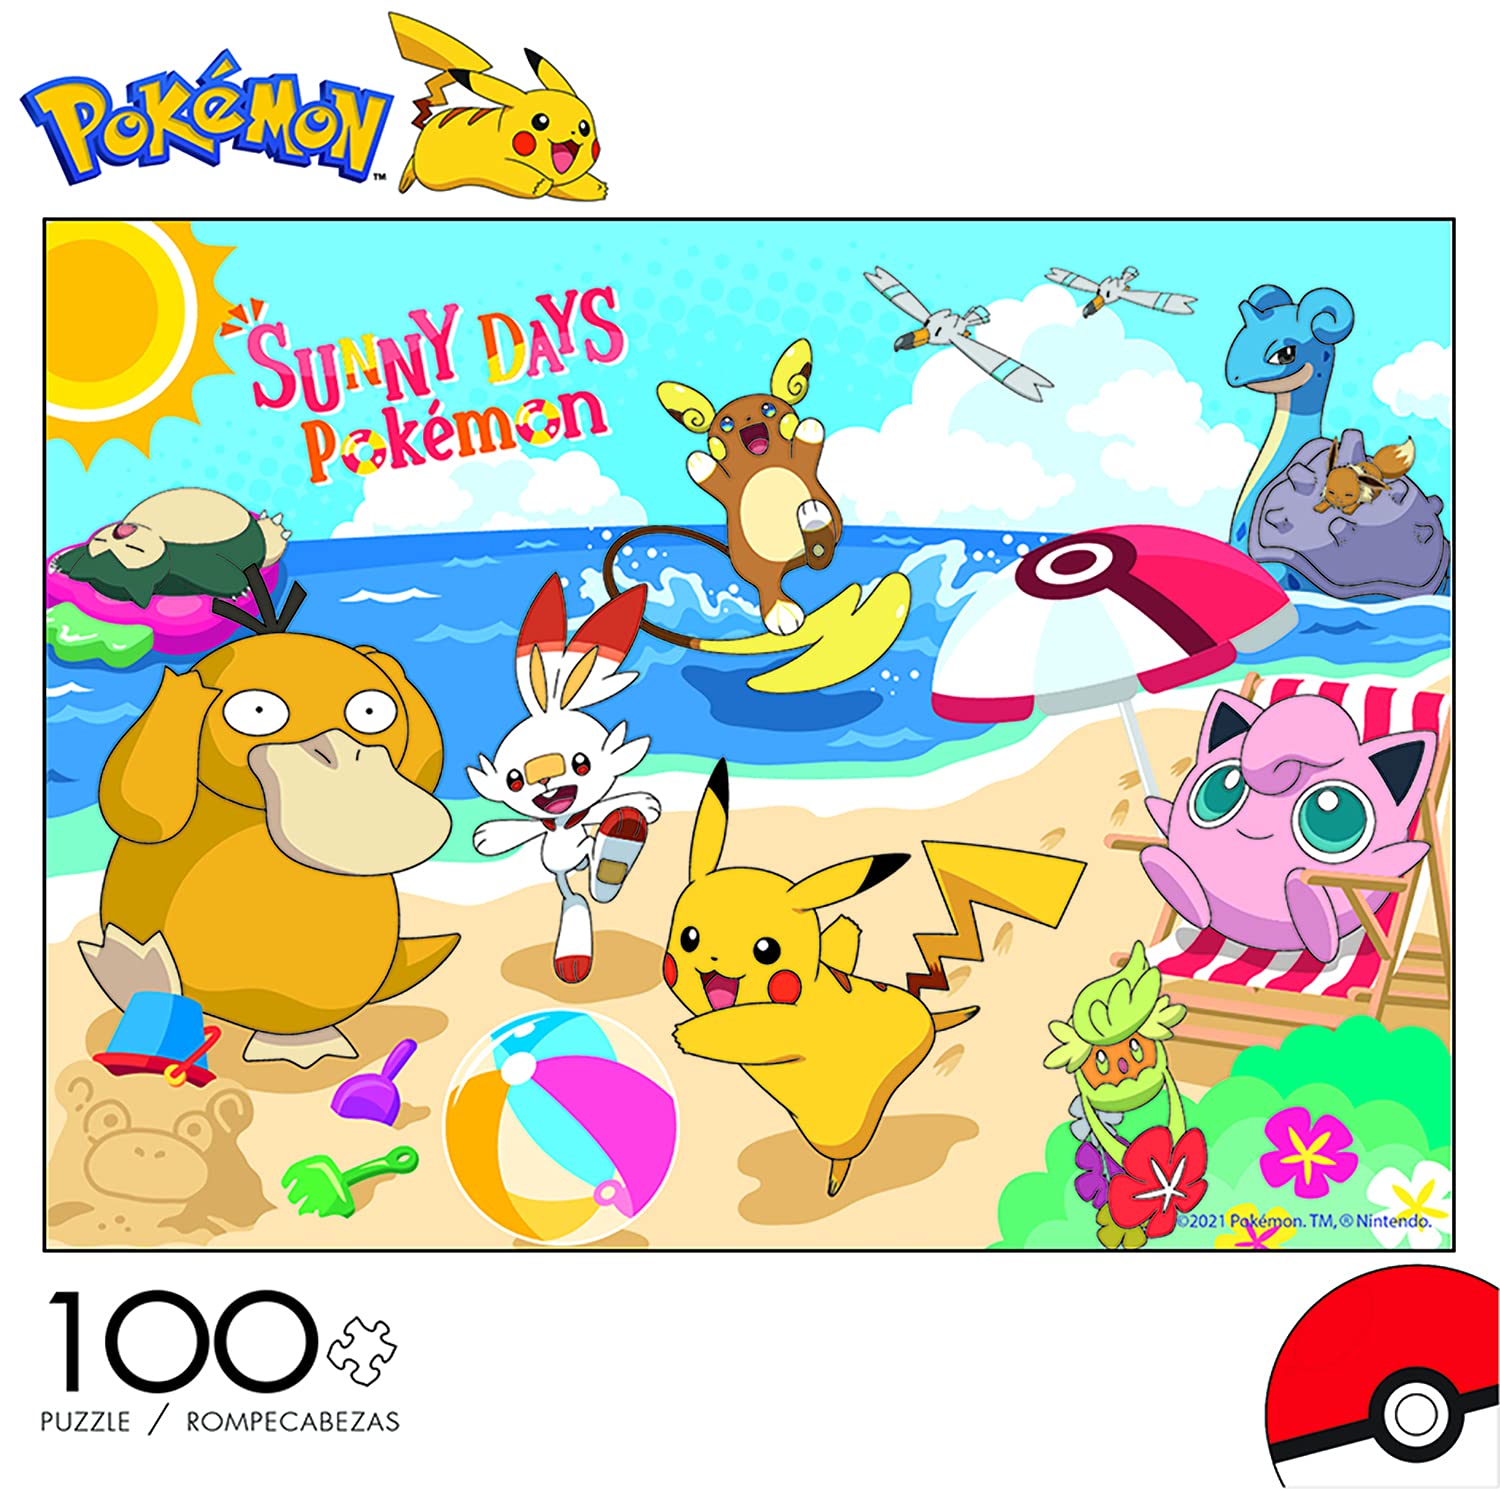 Buffalo Games - Pokemon Beach Day - 100 Piece Jigsaw Puzzle for Families Challenging Puzzle Perfect for Family Time - 100 Piece Finished Size is 15.00 x 11.00